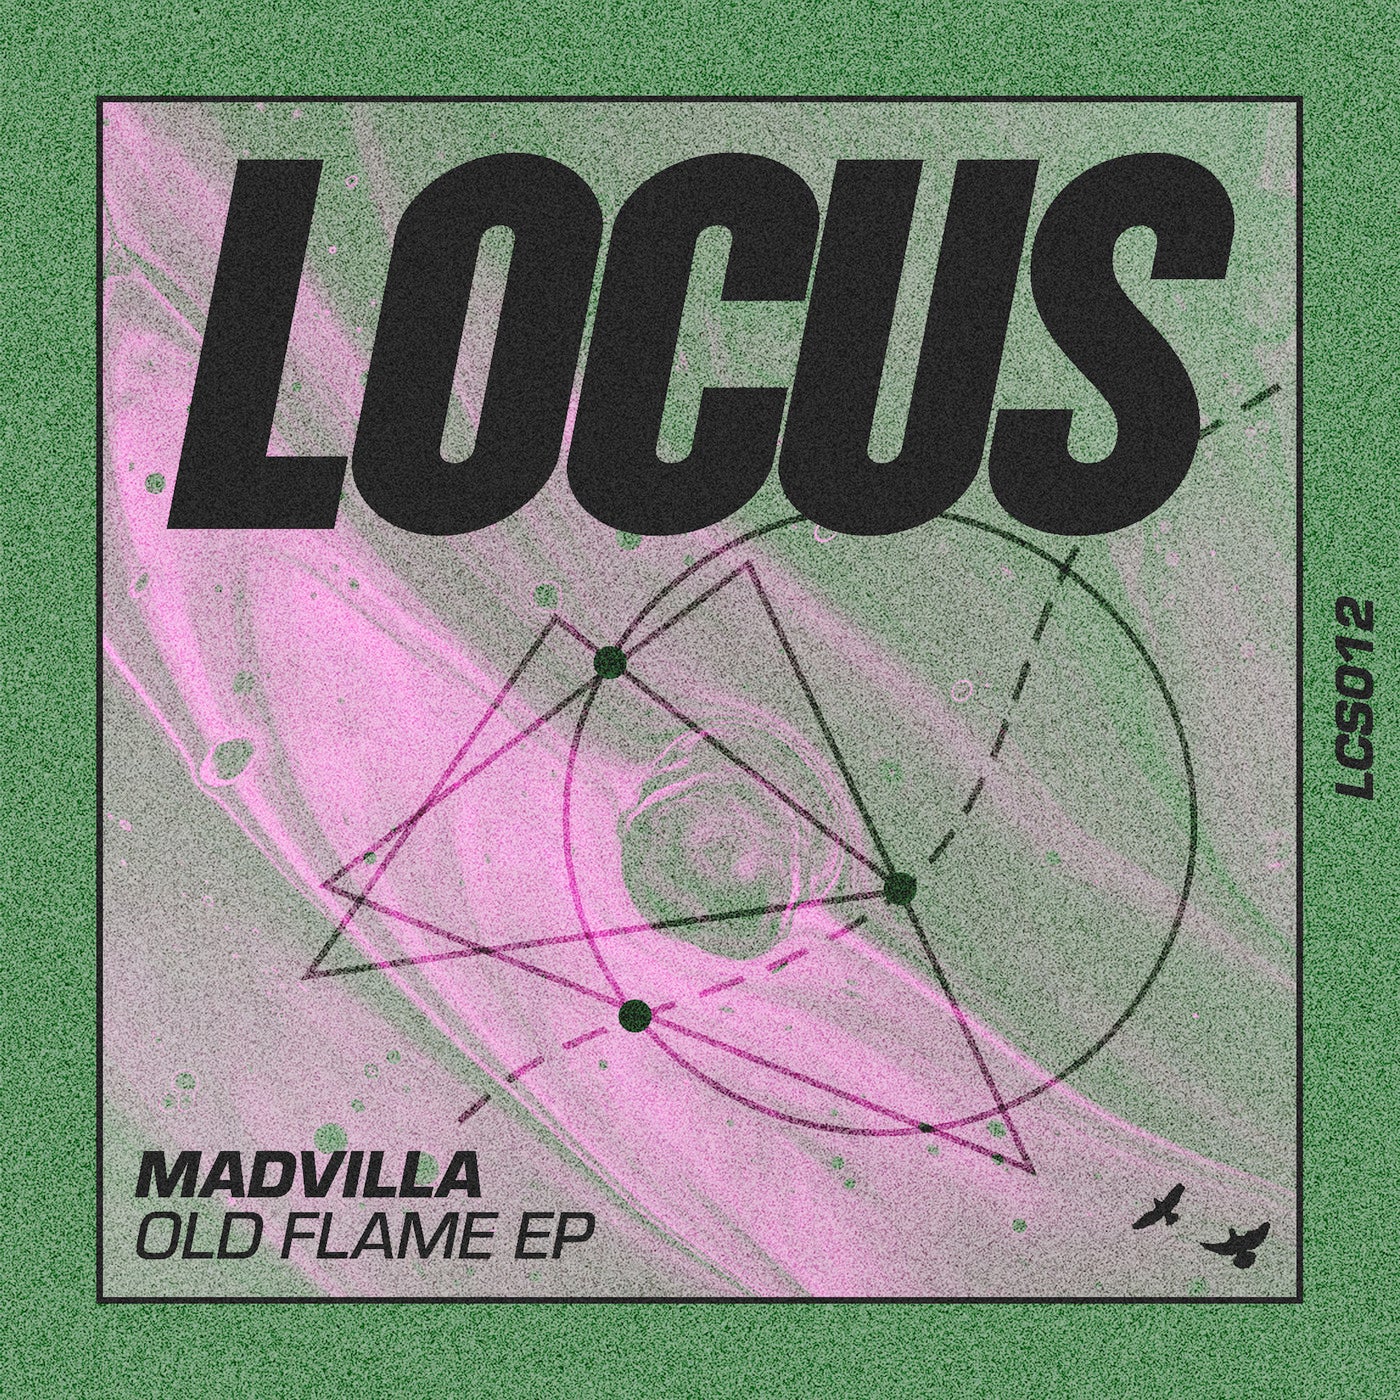 Download Old Flame EP on Electrobuzz